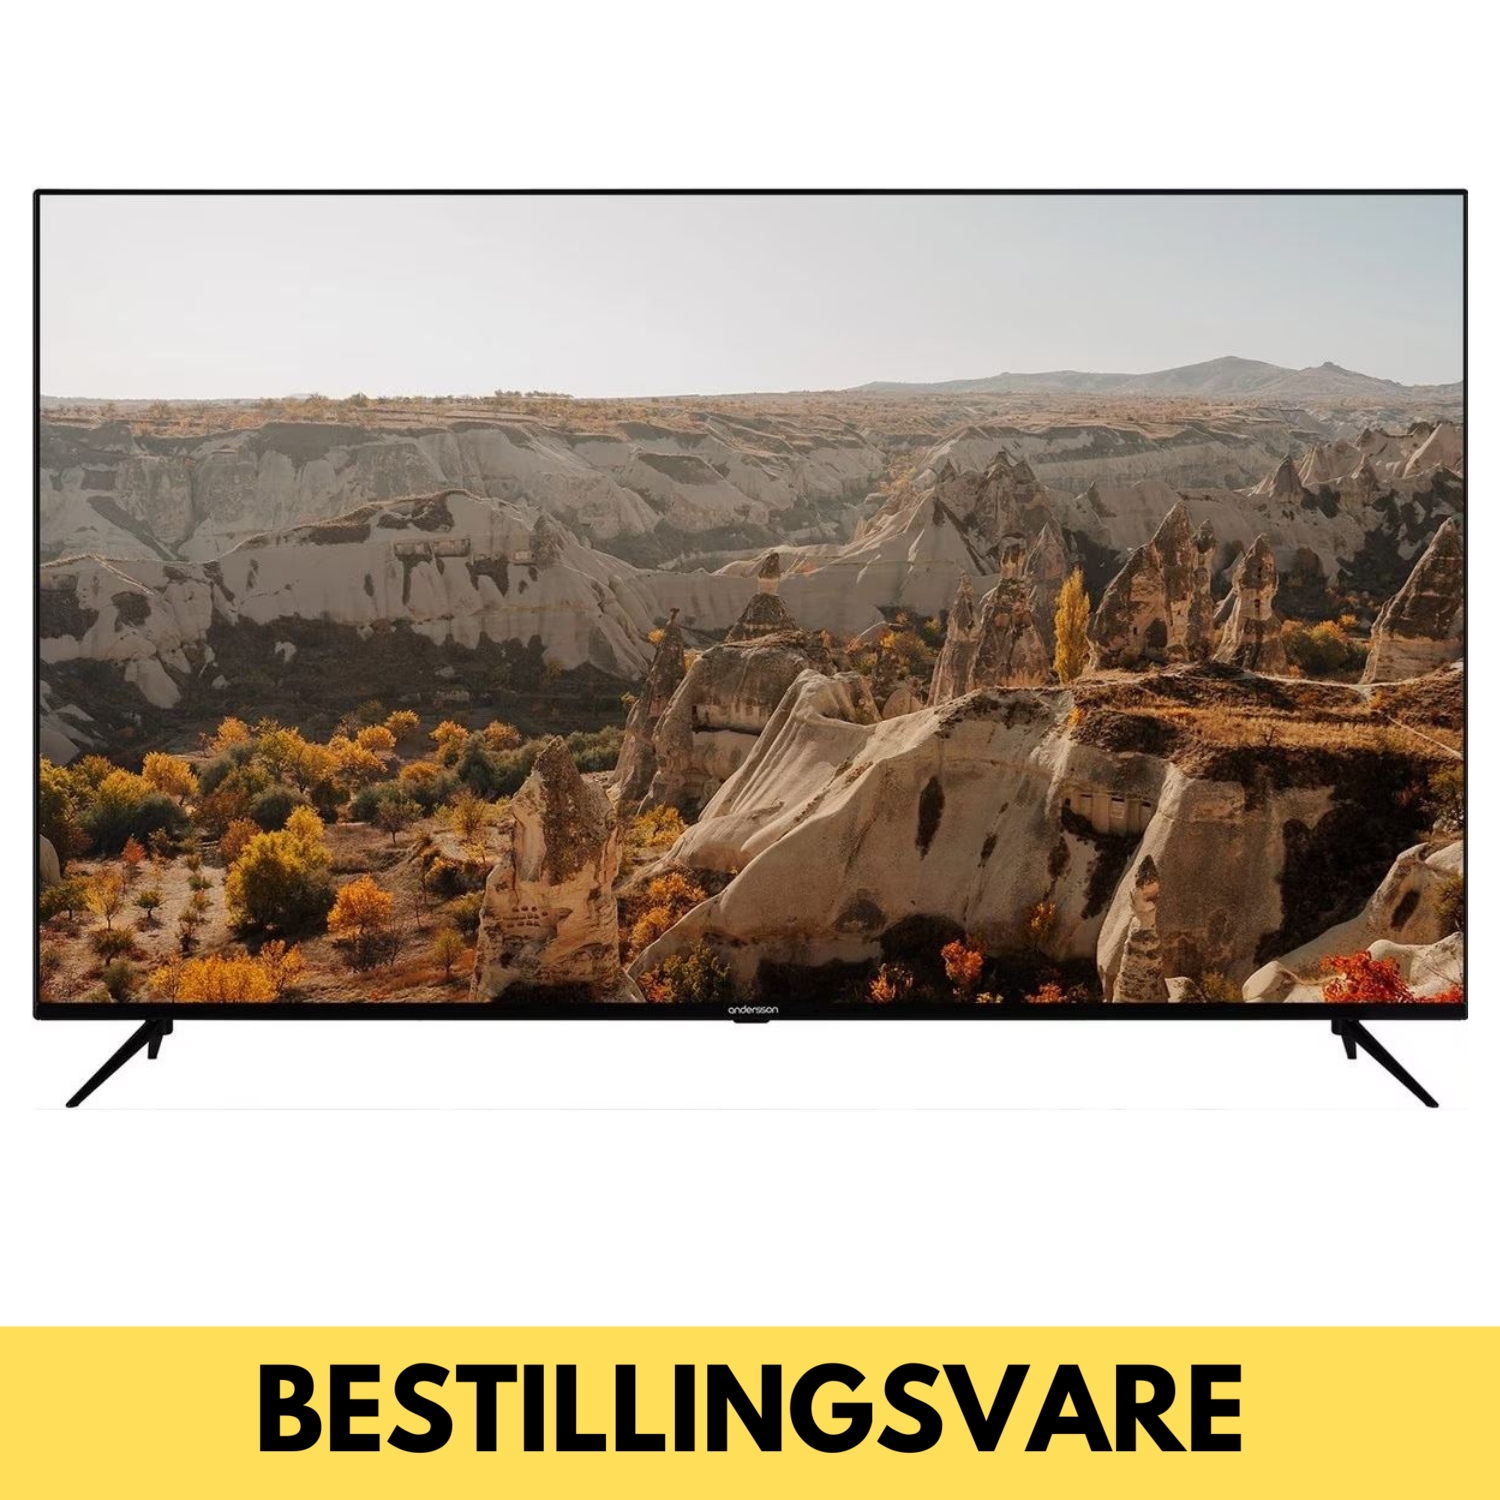 Andersson 65" 4K LED TV